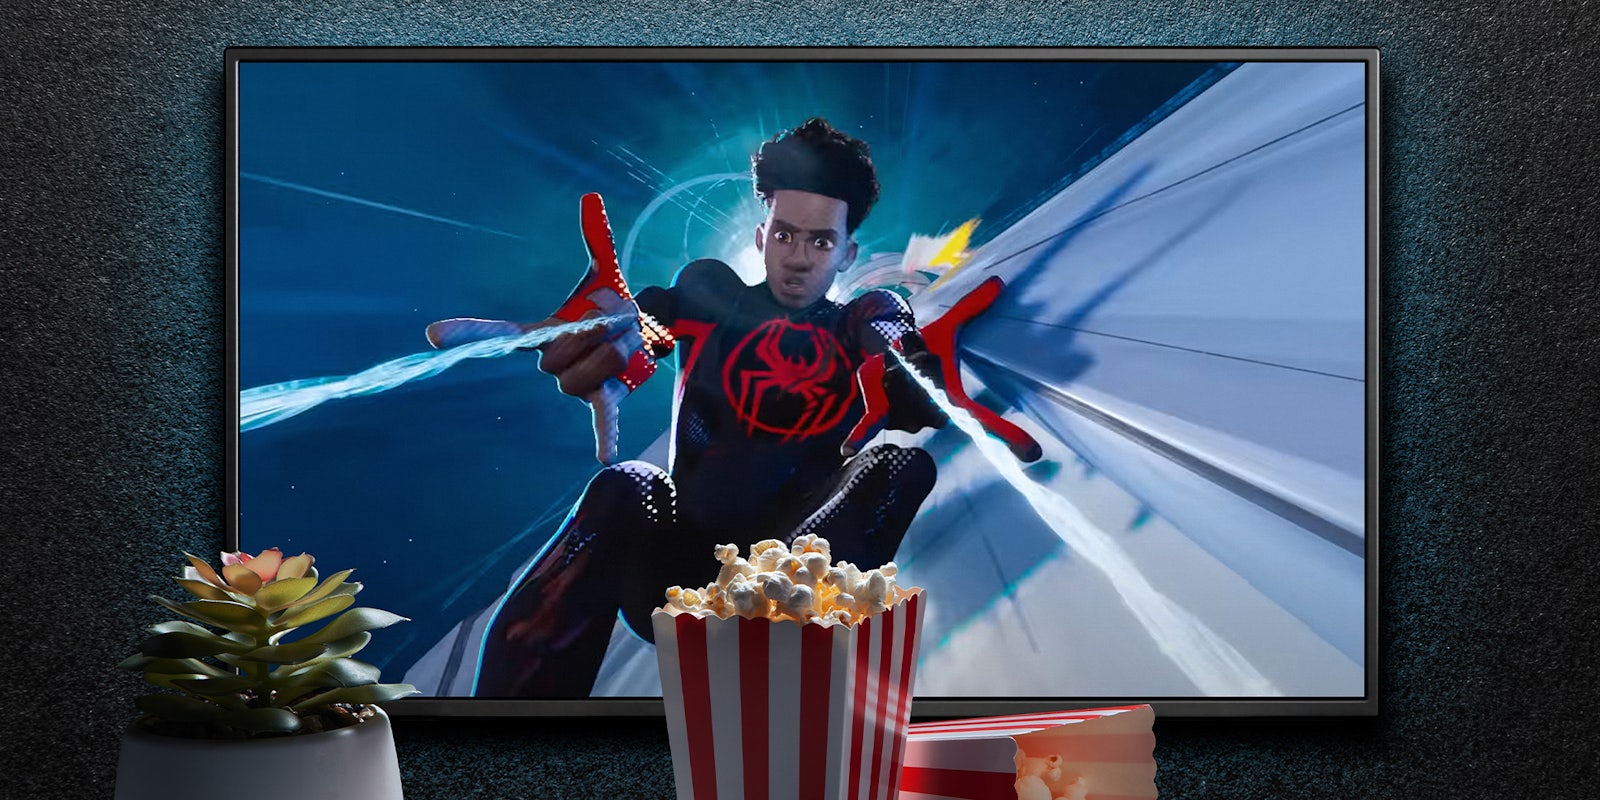 TV screen playing Spider-Man Across the Spider-Verse trailer or movie. TV with remote control, popcorn boxes and home plant